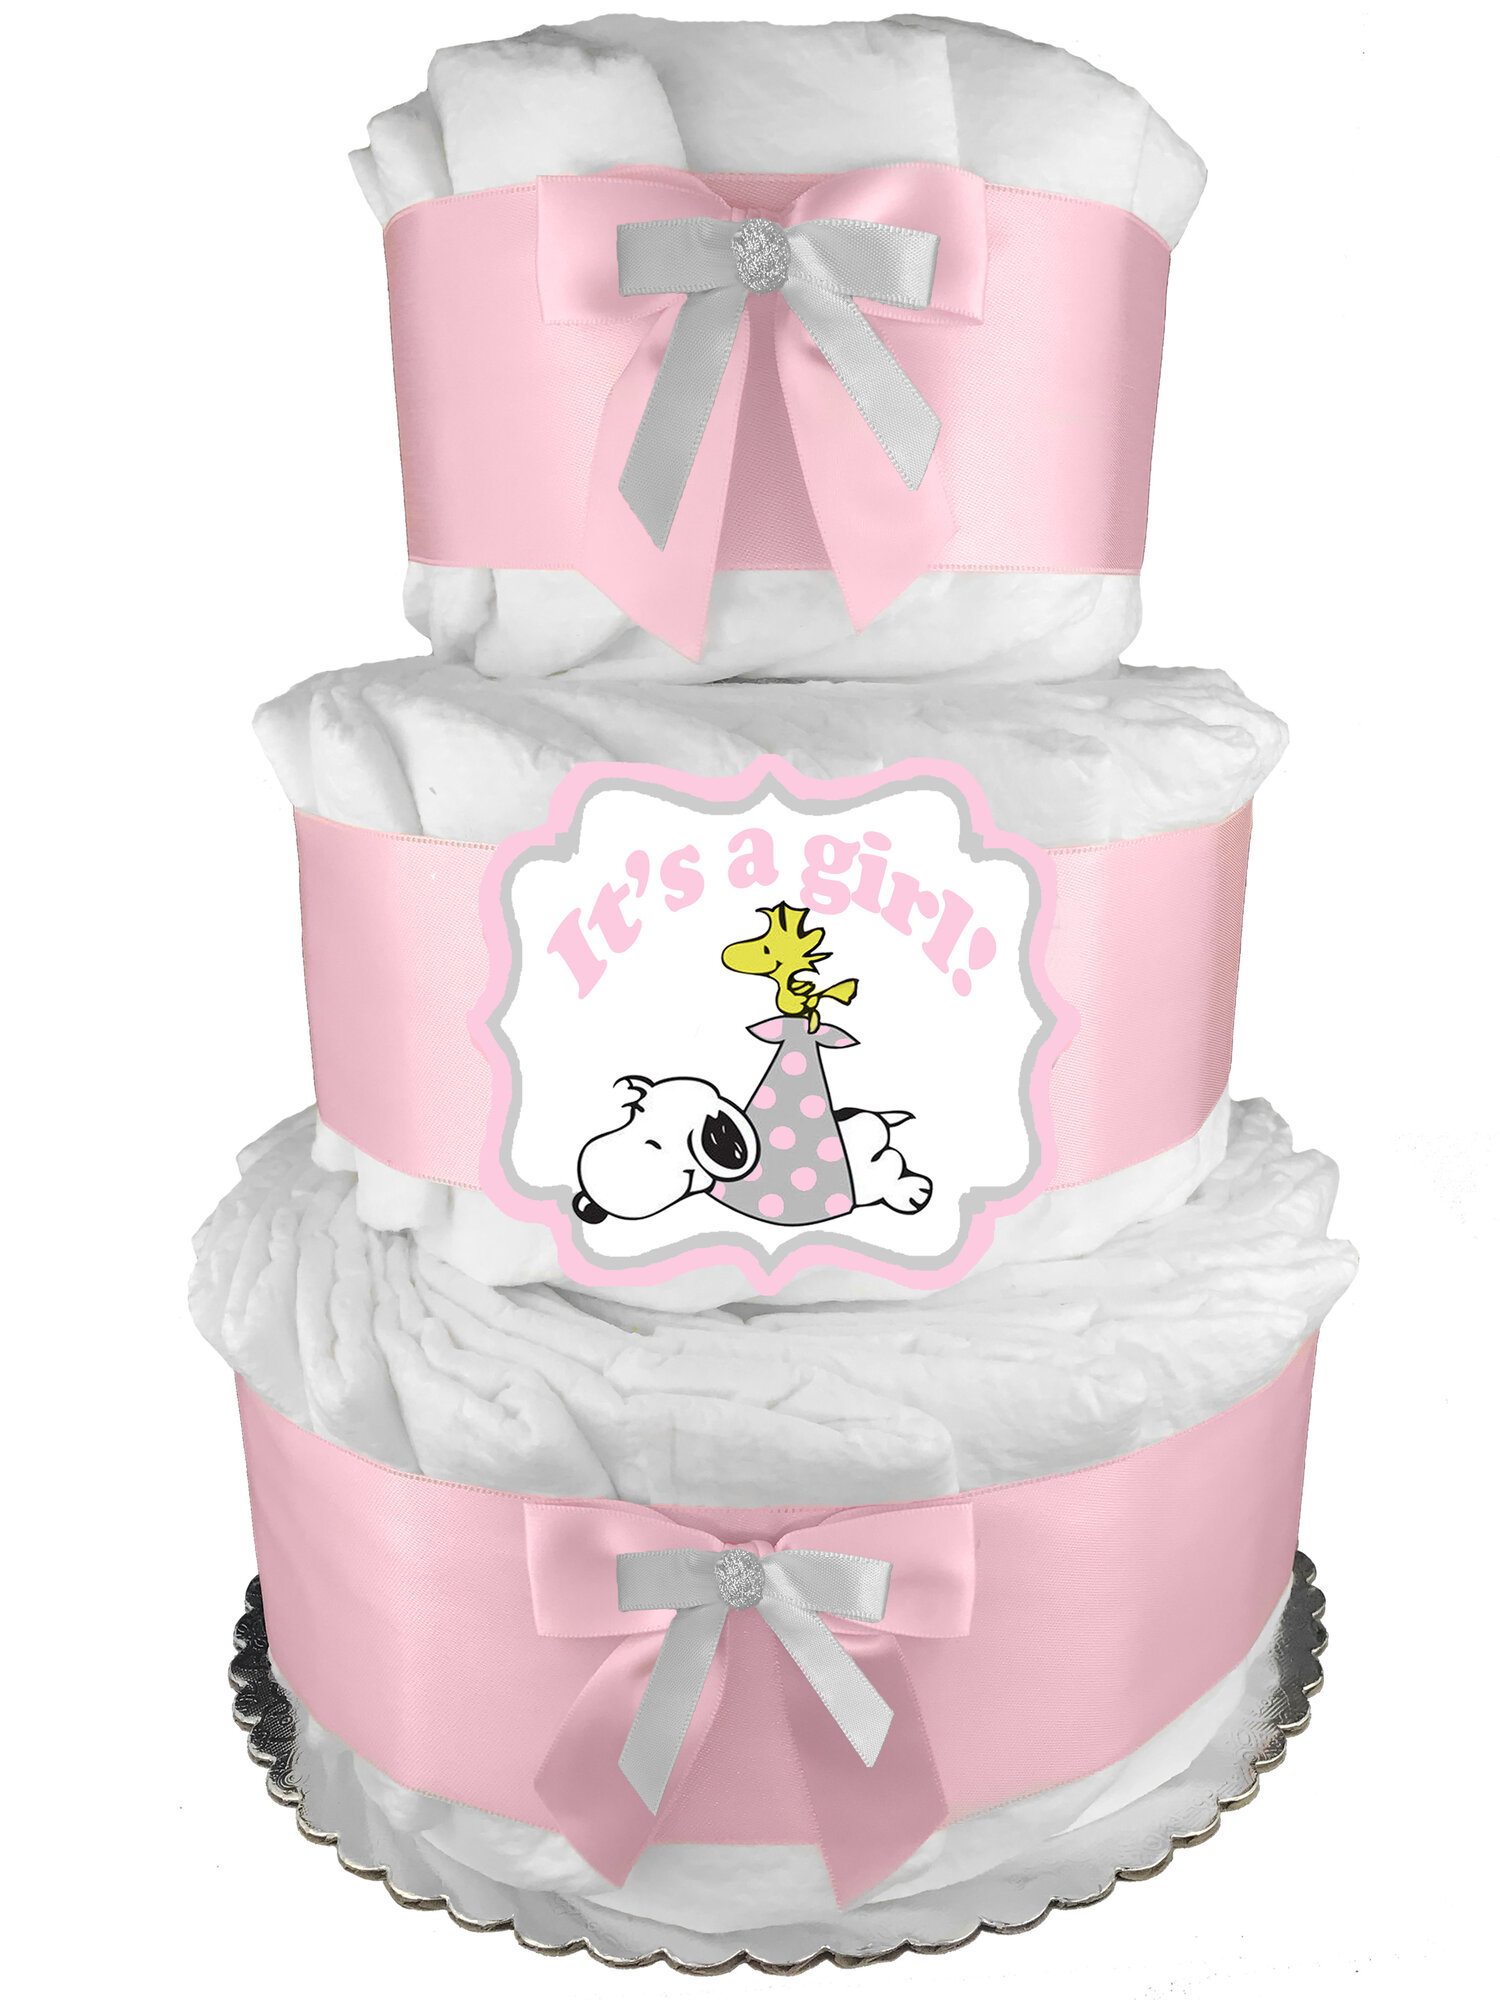 Detail Snoopy Baby Shower Cake Nomer 29